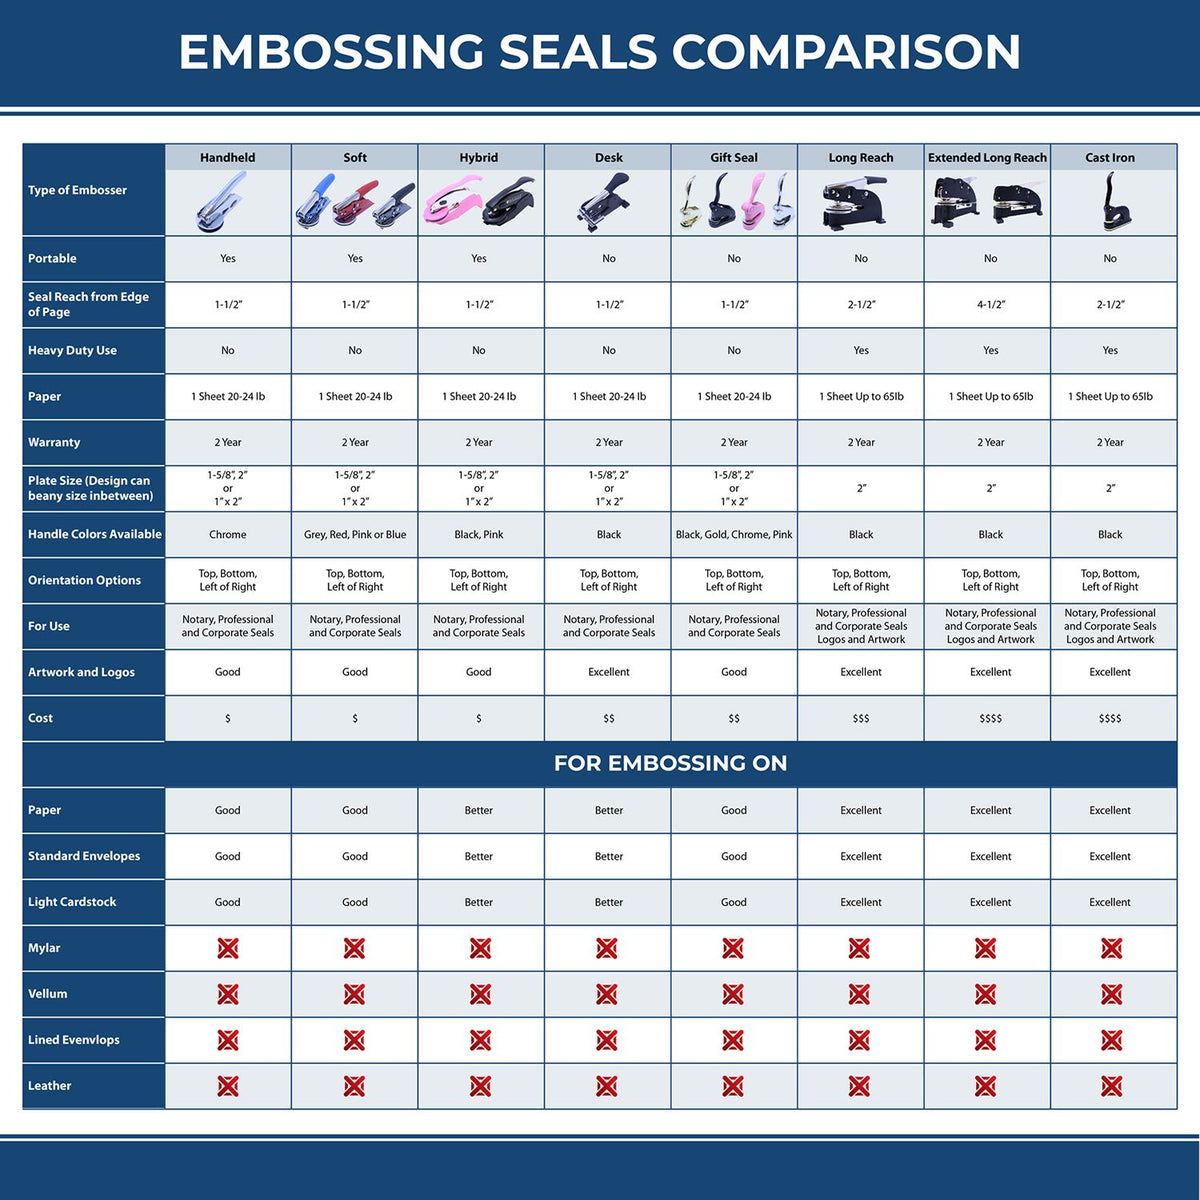 A comparison chart for the different types of mount models available for the State of Florida Extended Long Reach Geologist Seal